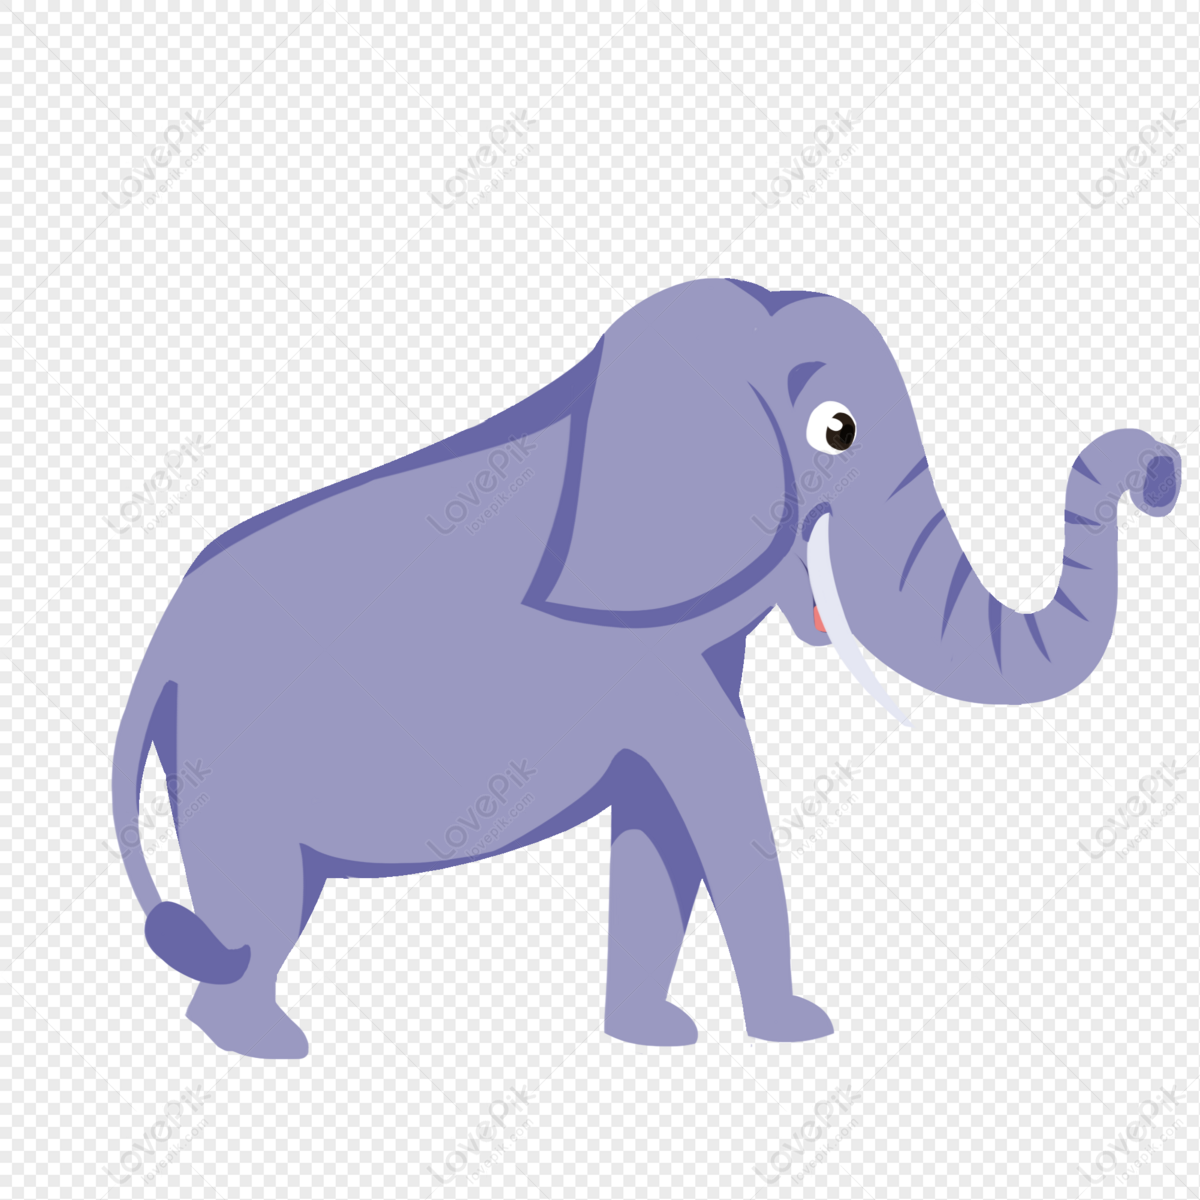 Elephant PNG Transparent Background And Clipart Image For Free Download -  Lovepik | 401497410